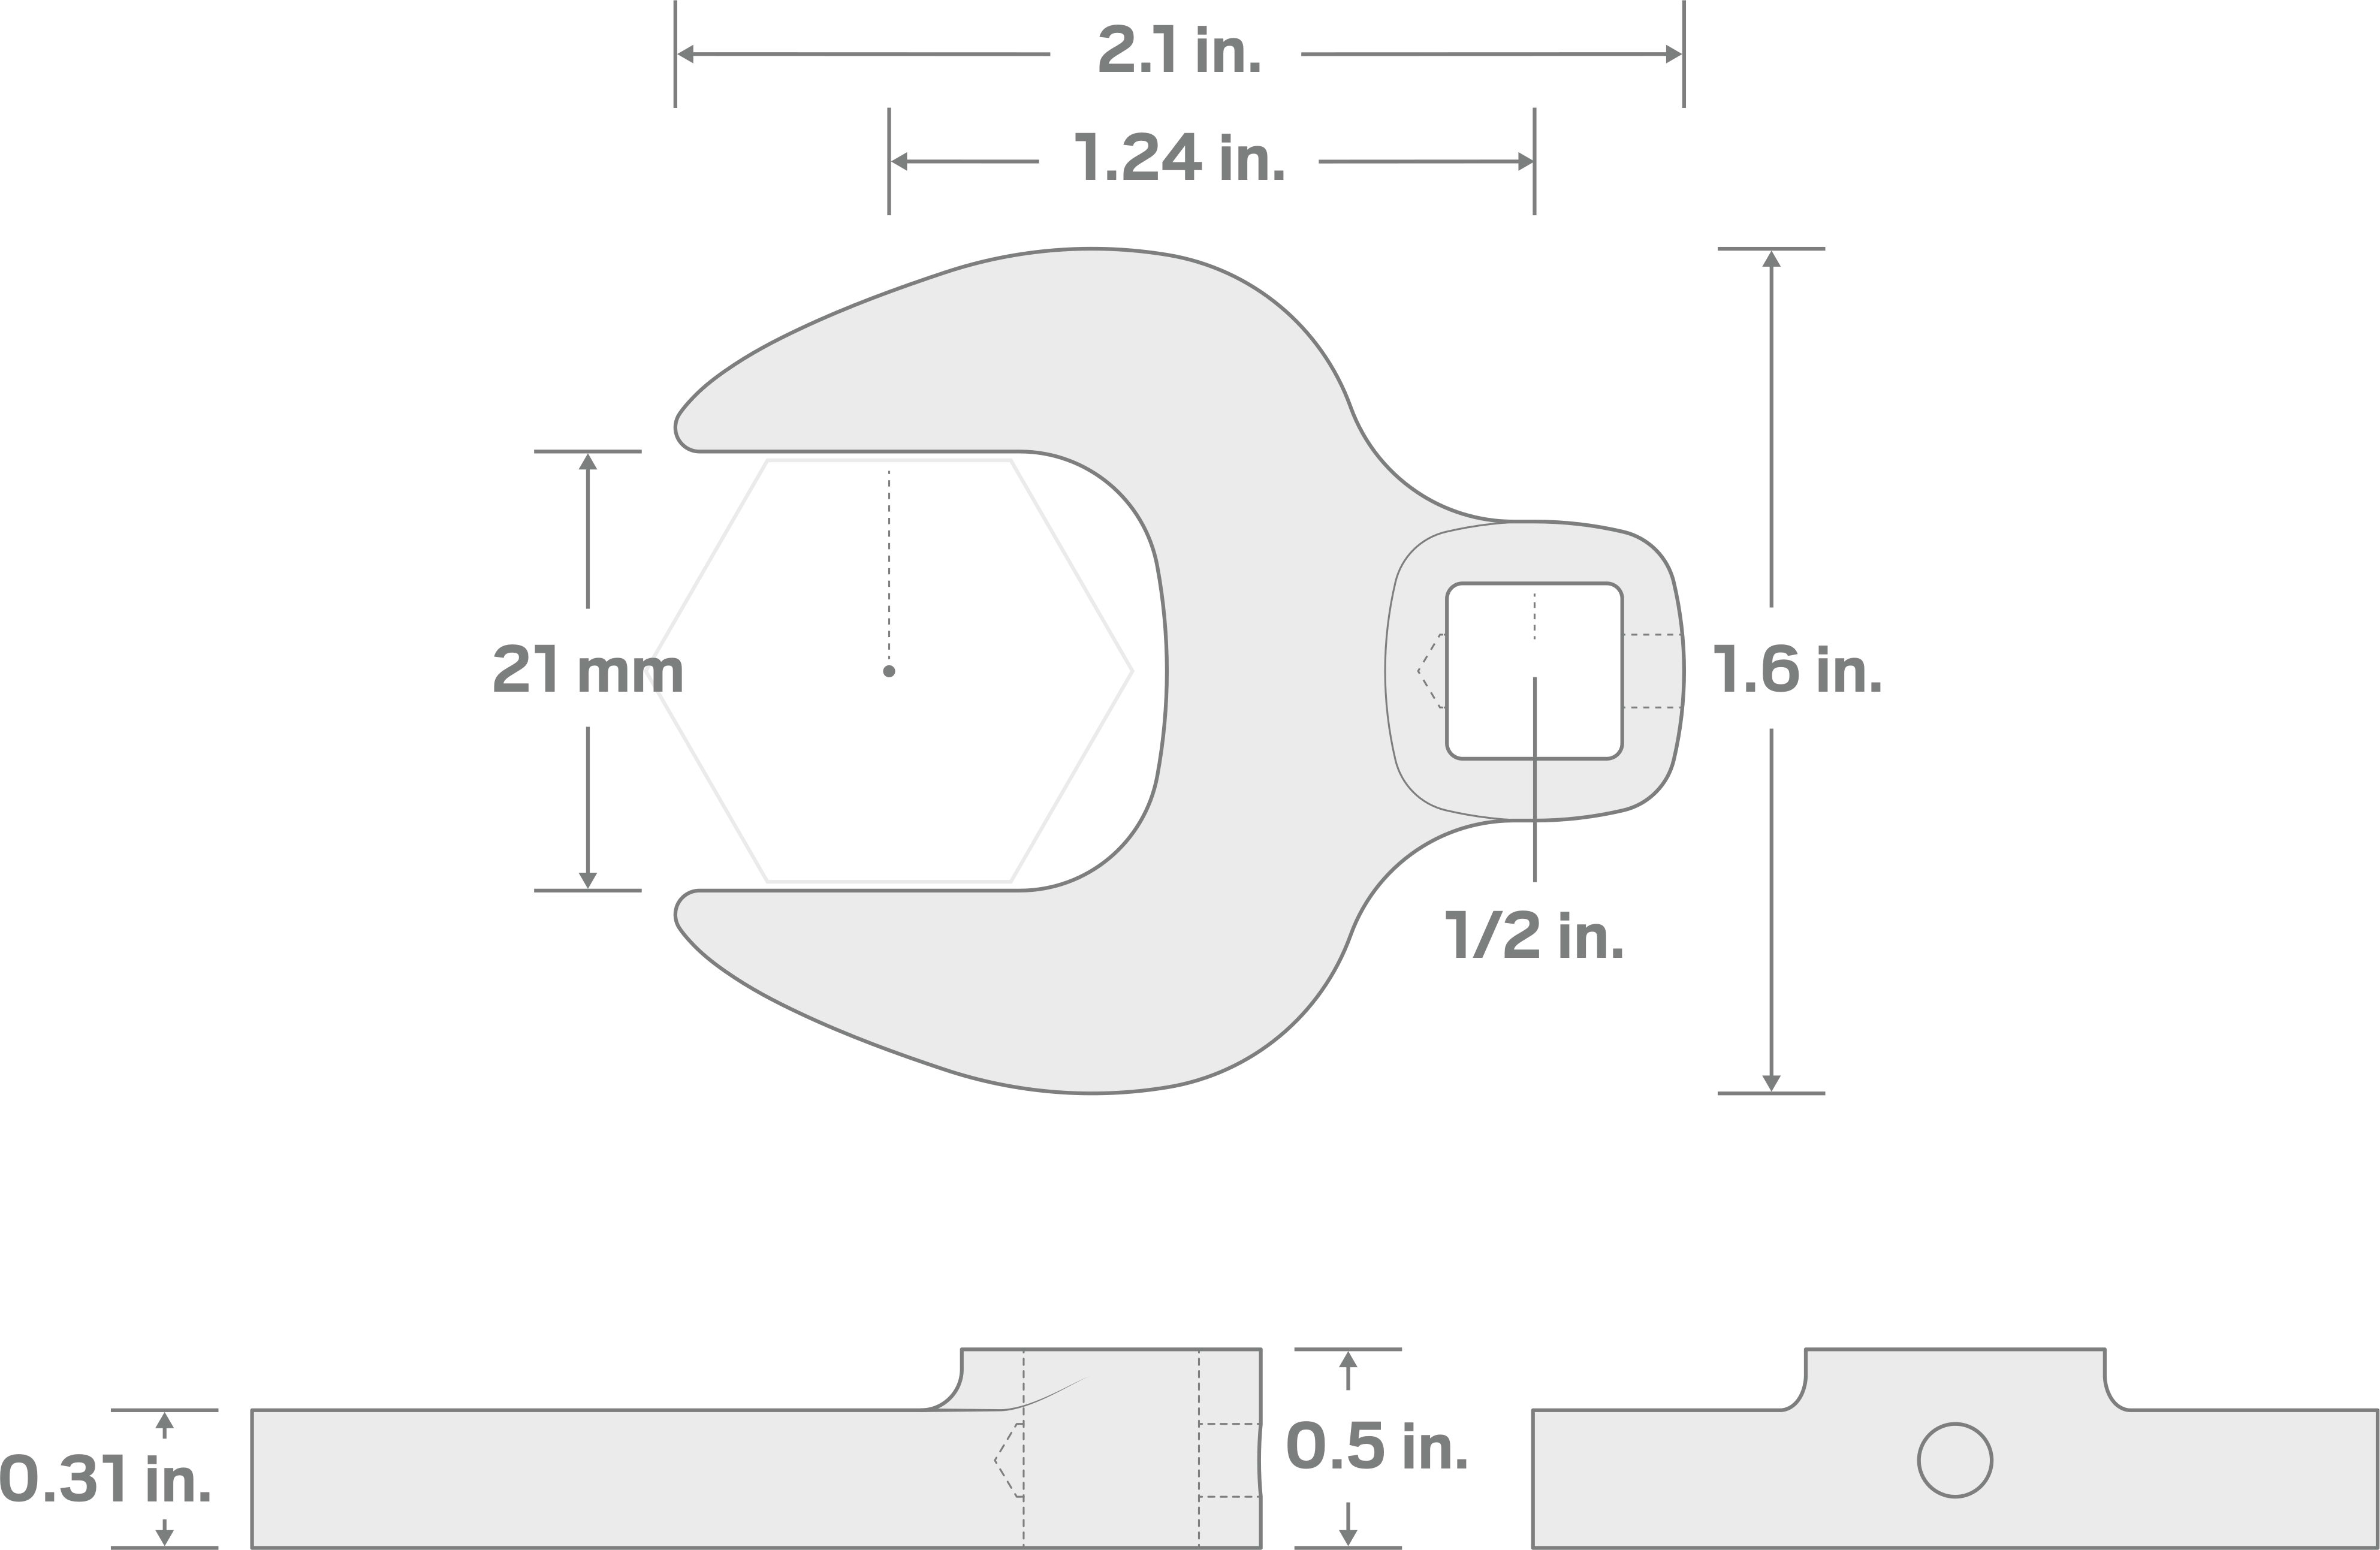 Specs for 1/2 Inch Drive x 21 mm Crowfoot Wrench